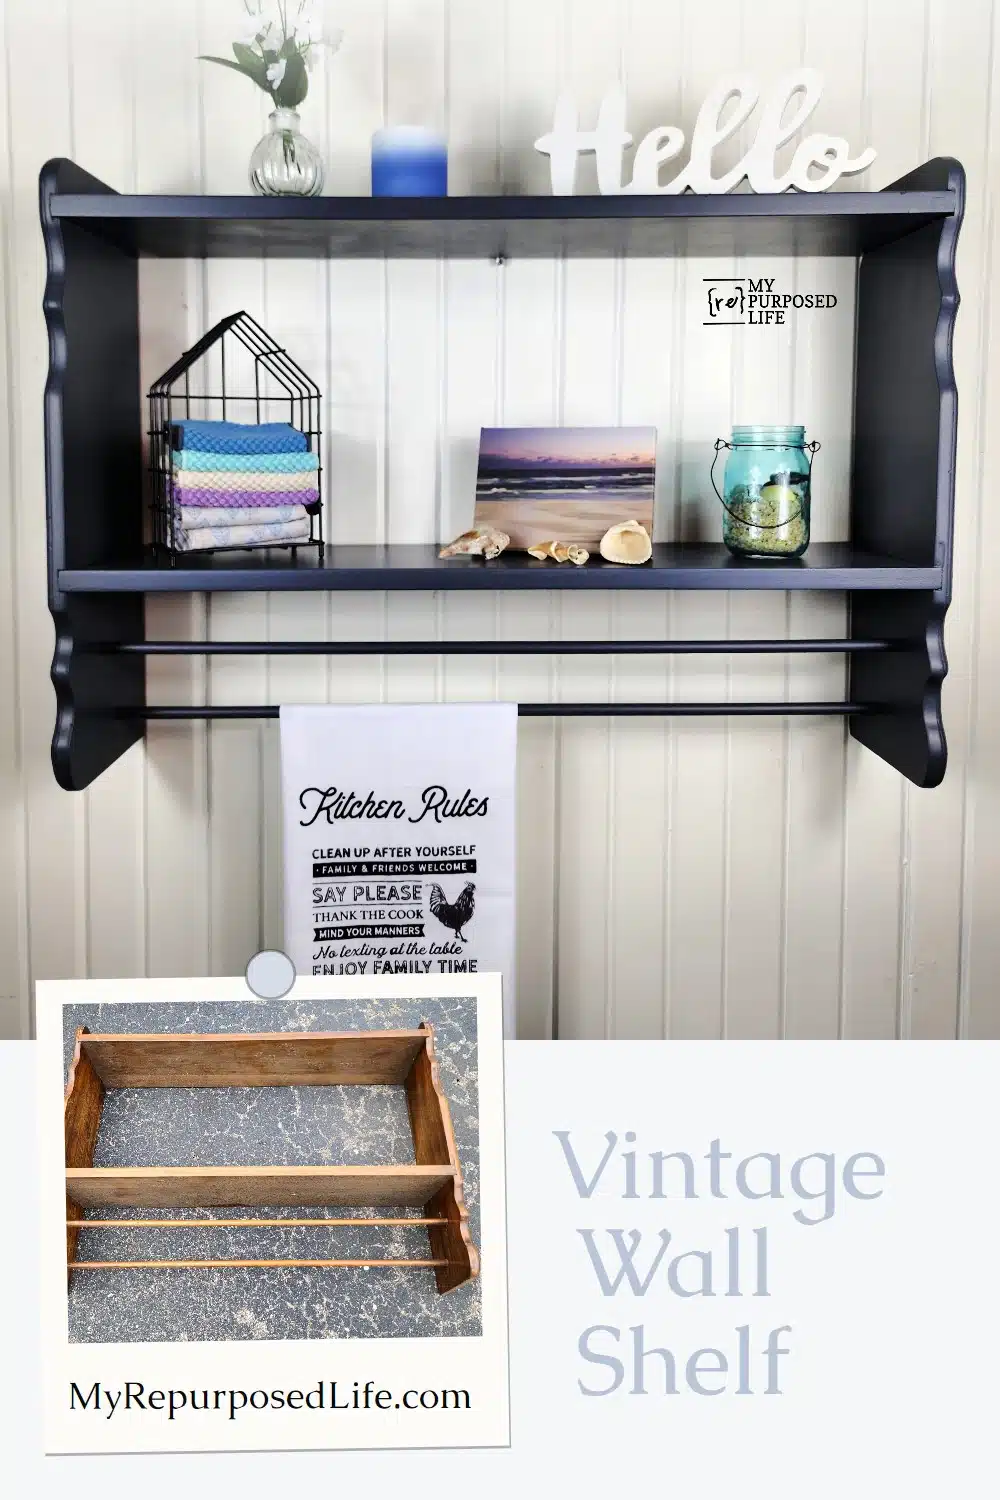 Maybe you call it a vintage wall shelf, or perhaps a whatnot shelf. Whatever you call it, it's so handy for almost any room in the house! Think kitchen, bathroom, guest room, laundry room, the possibilities are endless. It would even make a great plant shelf. #MyRepurposedLife via @repurposedlife